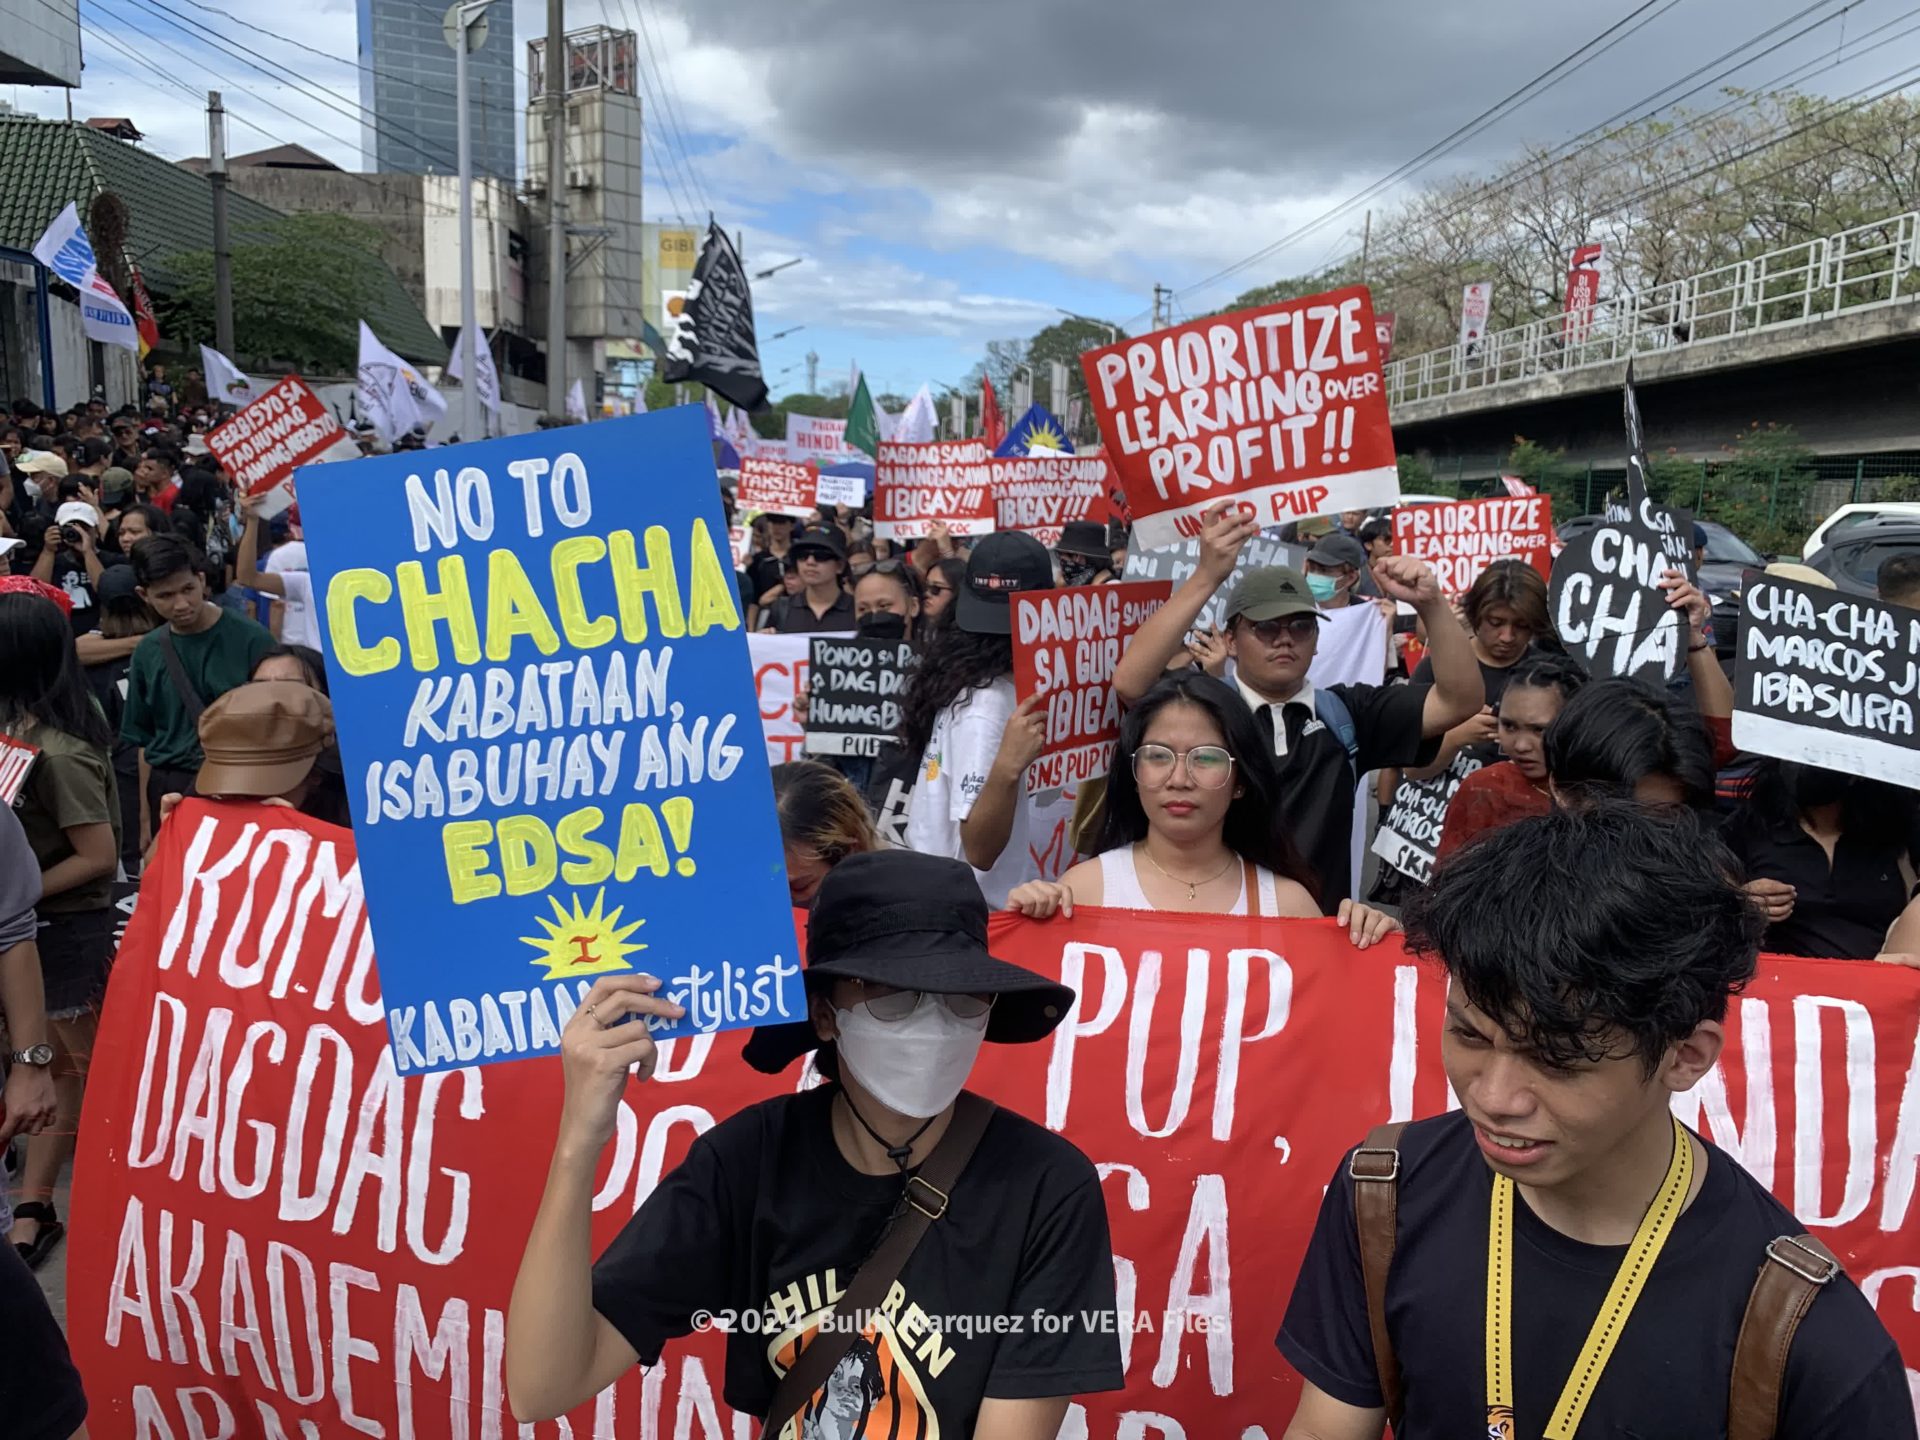 Slogans and placards at the rally showed strong opposition to attempts to change the Constitution that was passed in 1987 following the 1986 restoration of democracy in the country. 5/10 Photo by Bullit Marquez for VERA Files